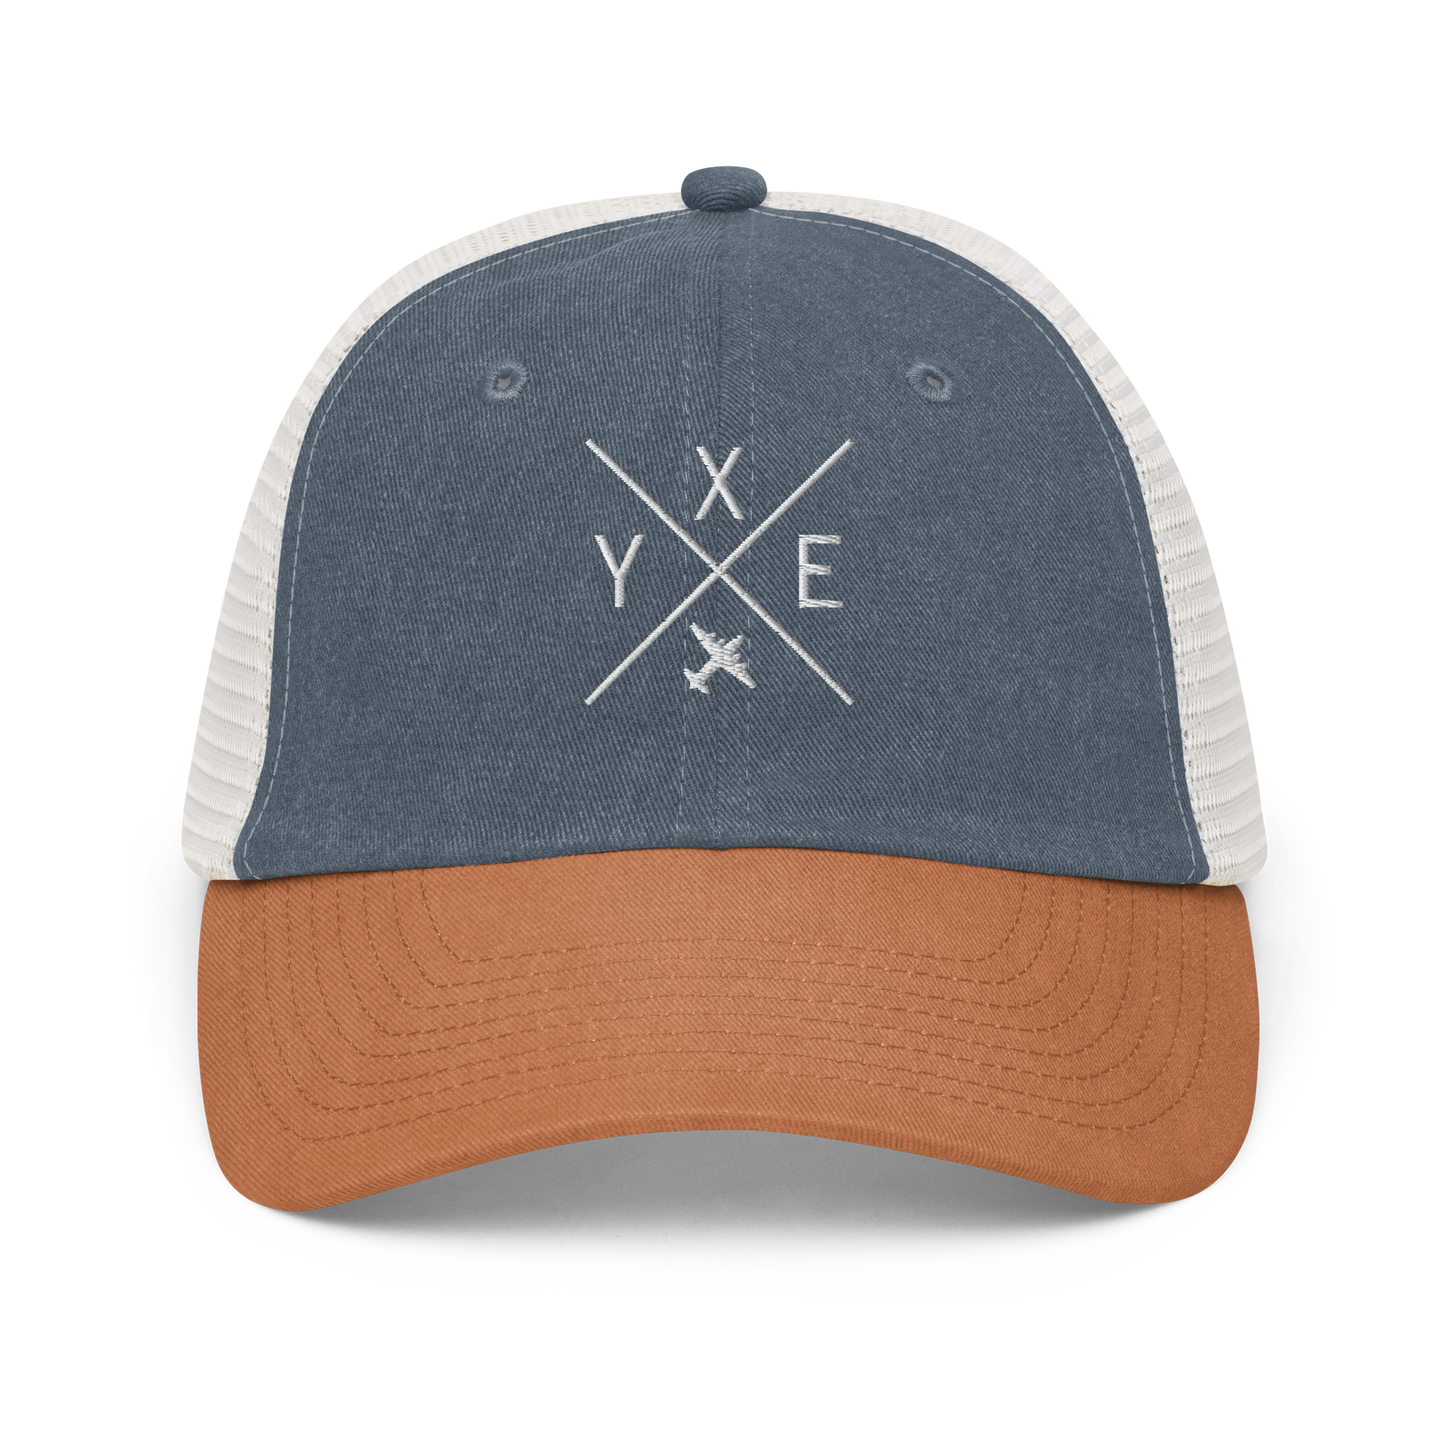 YHM Designs - YXE Saskatoon Pigment-Dyed Trucker Cap - Crossed-X Design with Airport Code and Vintage Propliner - White Embroidery - Image 15